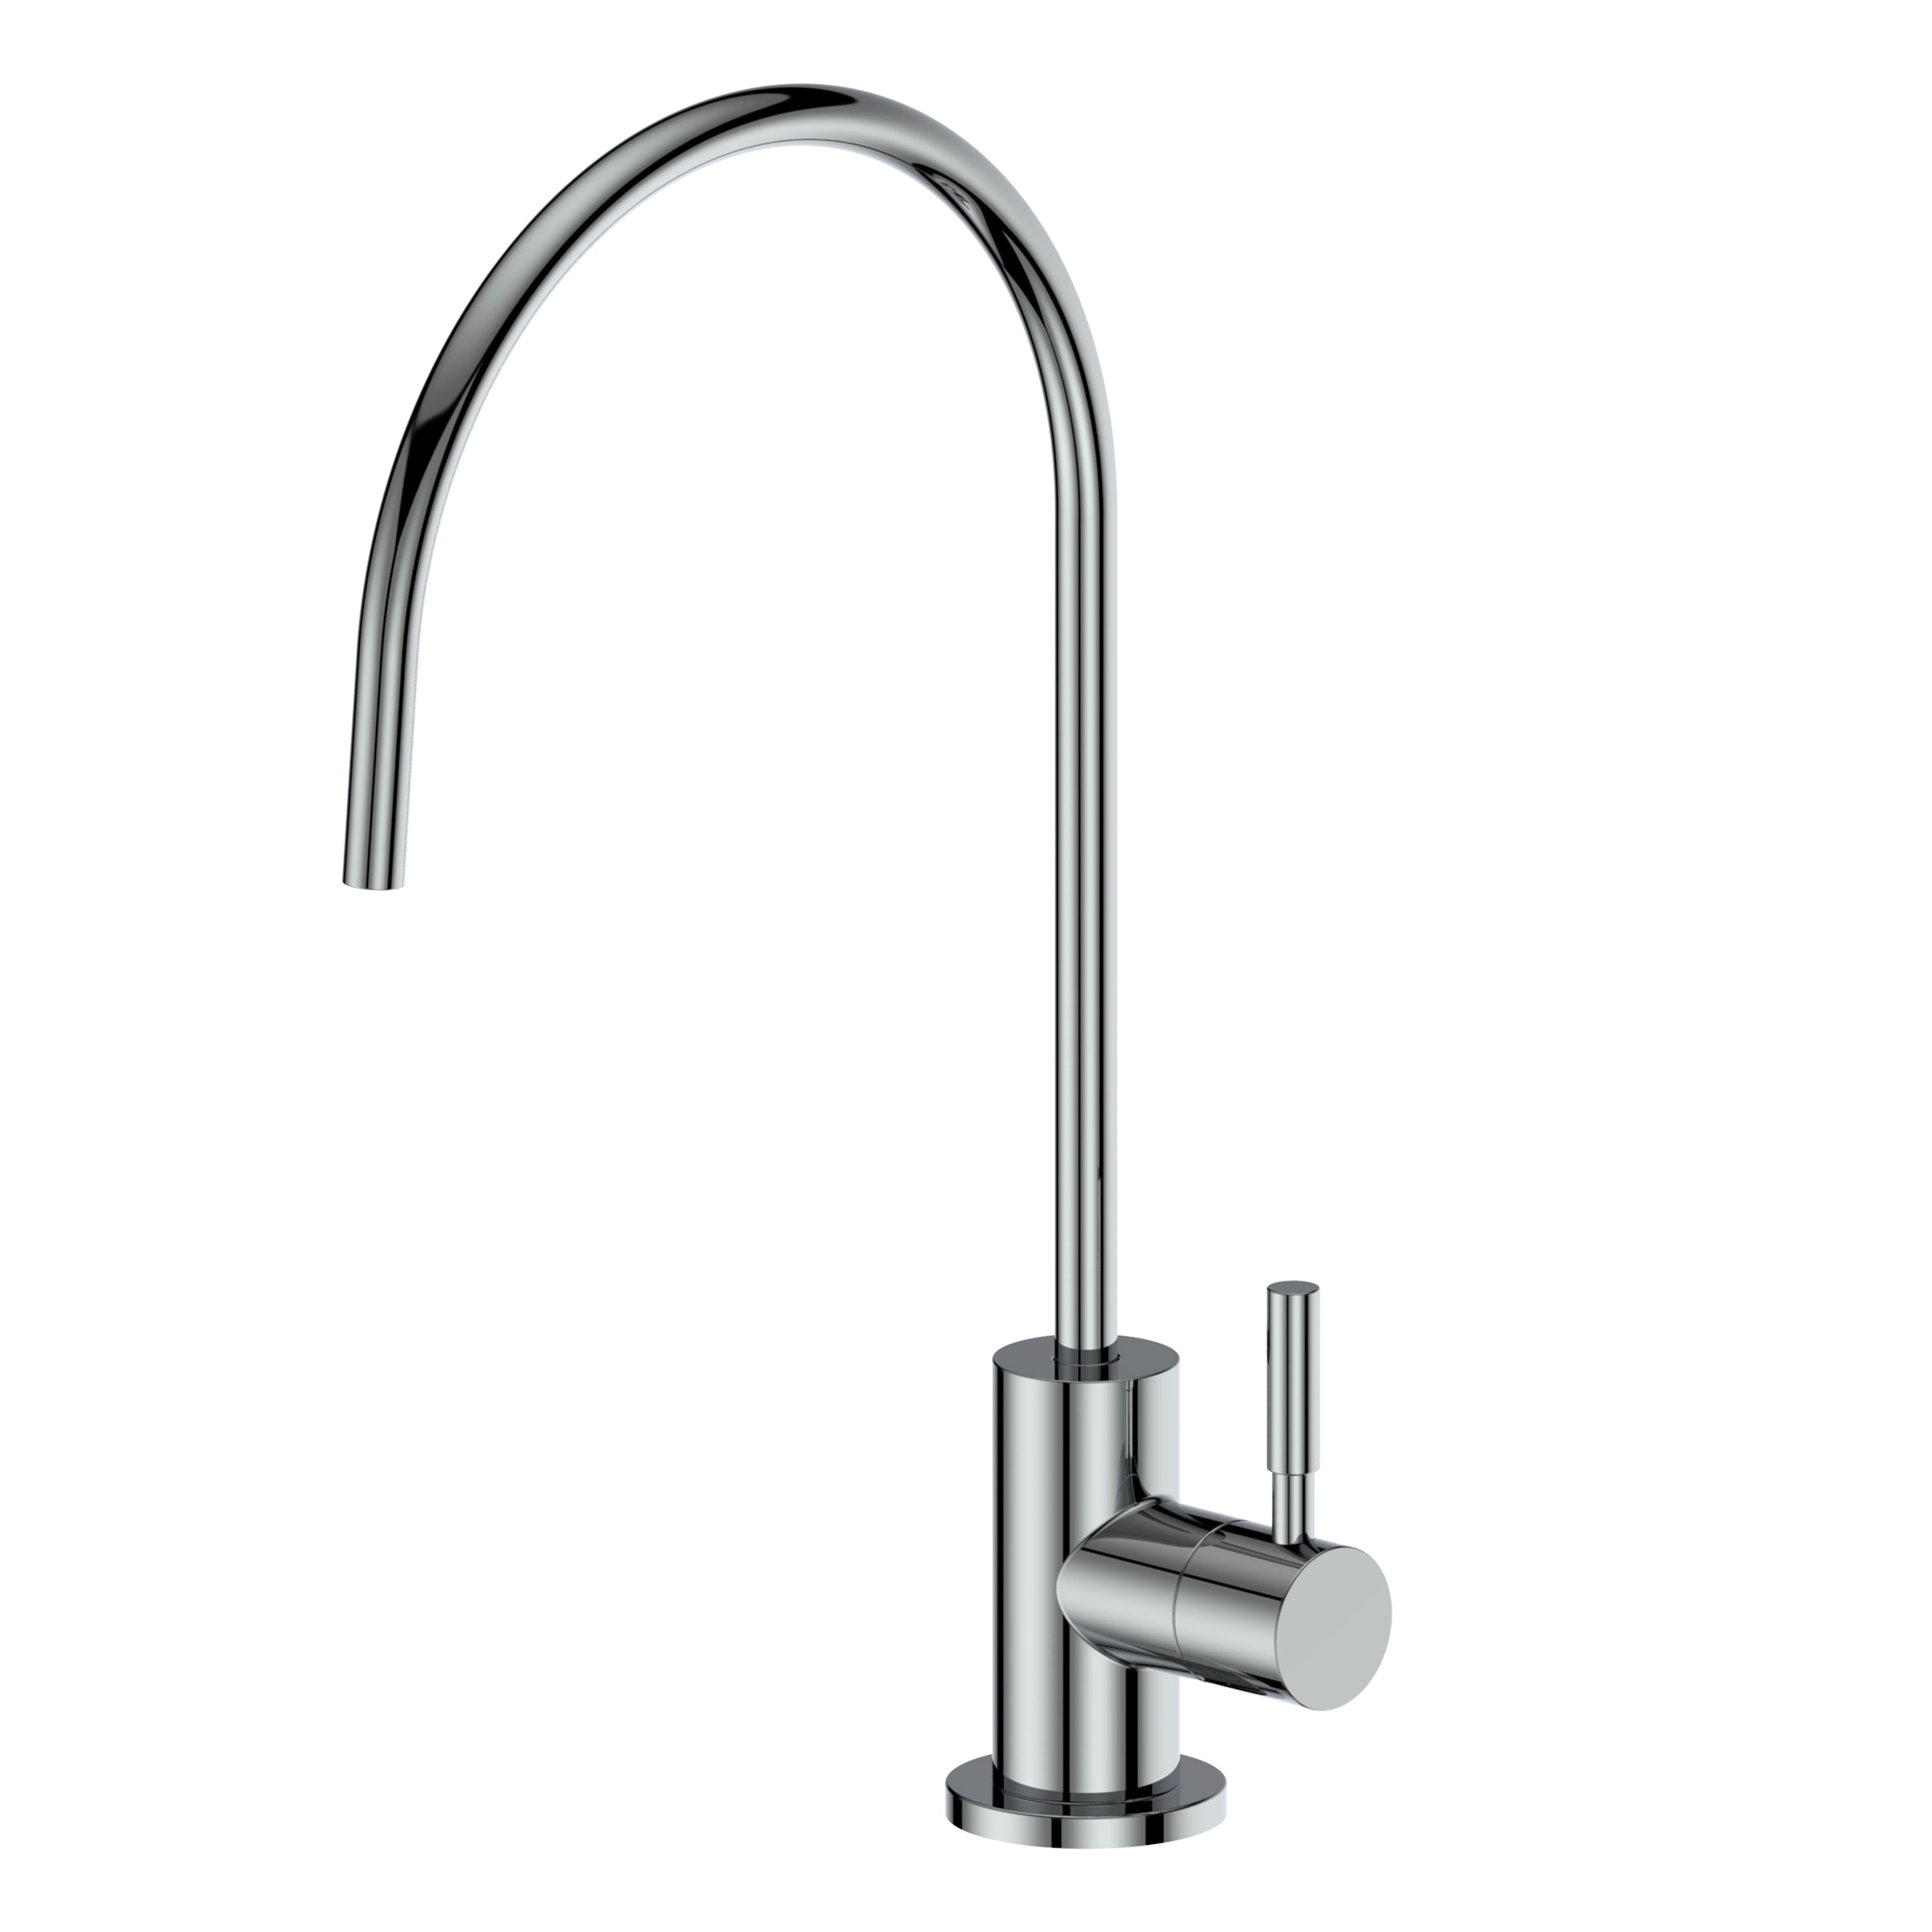 ZLINE Drink Faucet in Chrome.